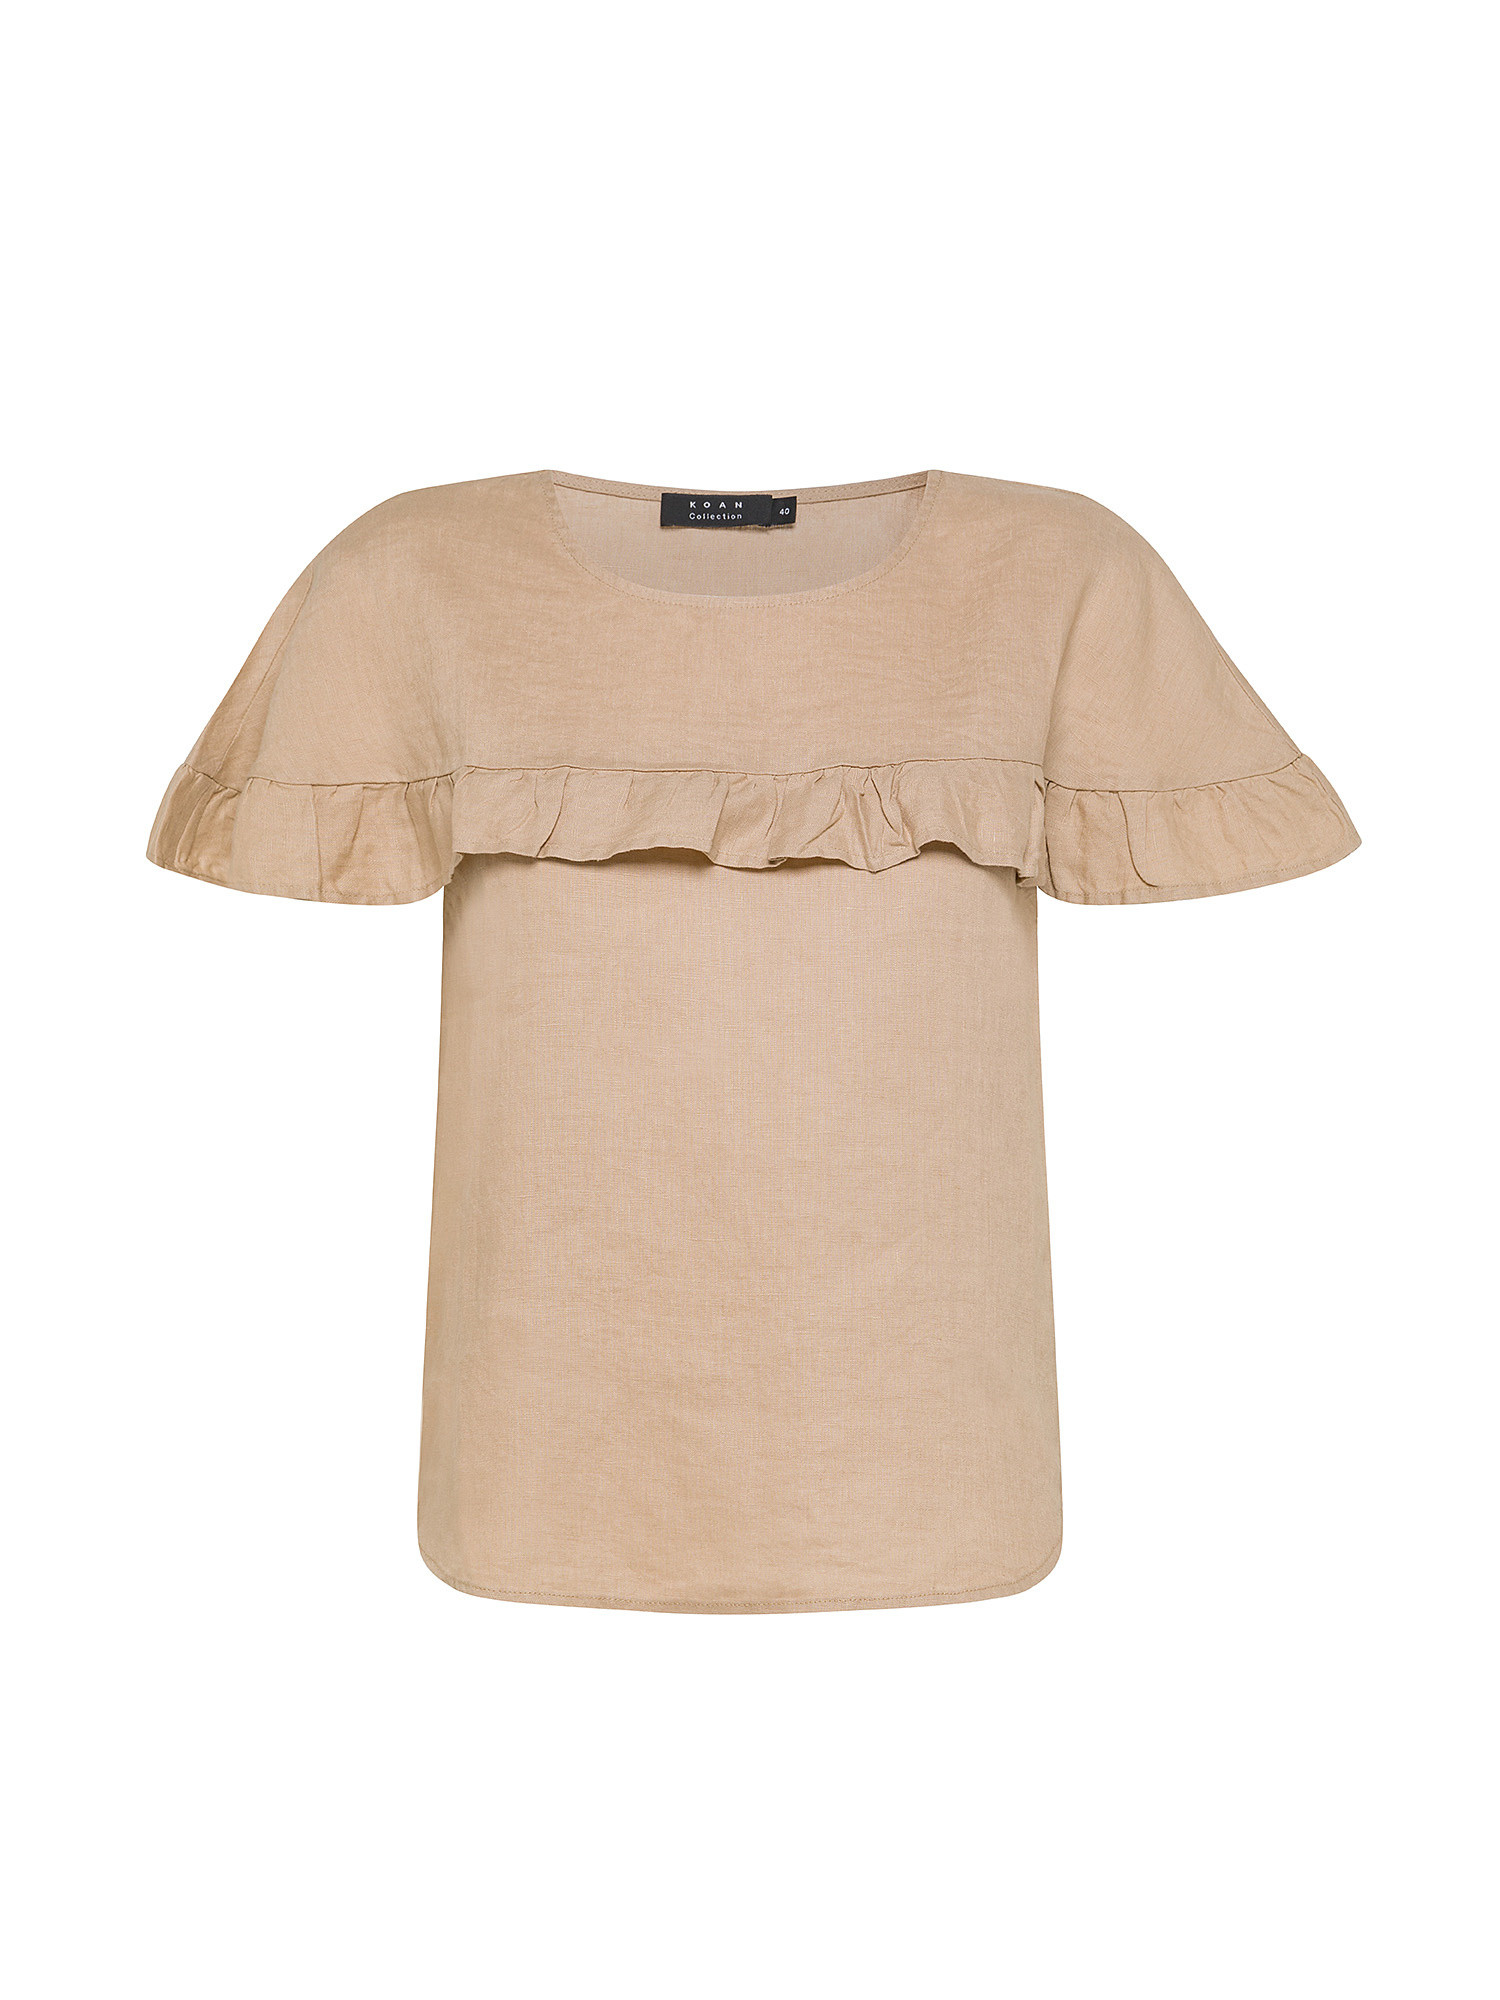 Koan - Linen blouse with ruffles, Beige, large image number 0